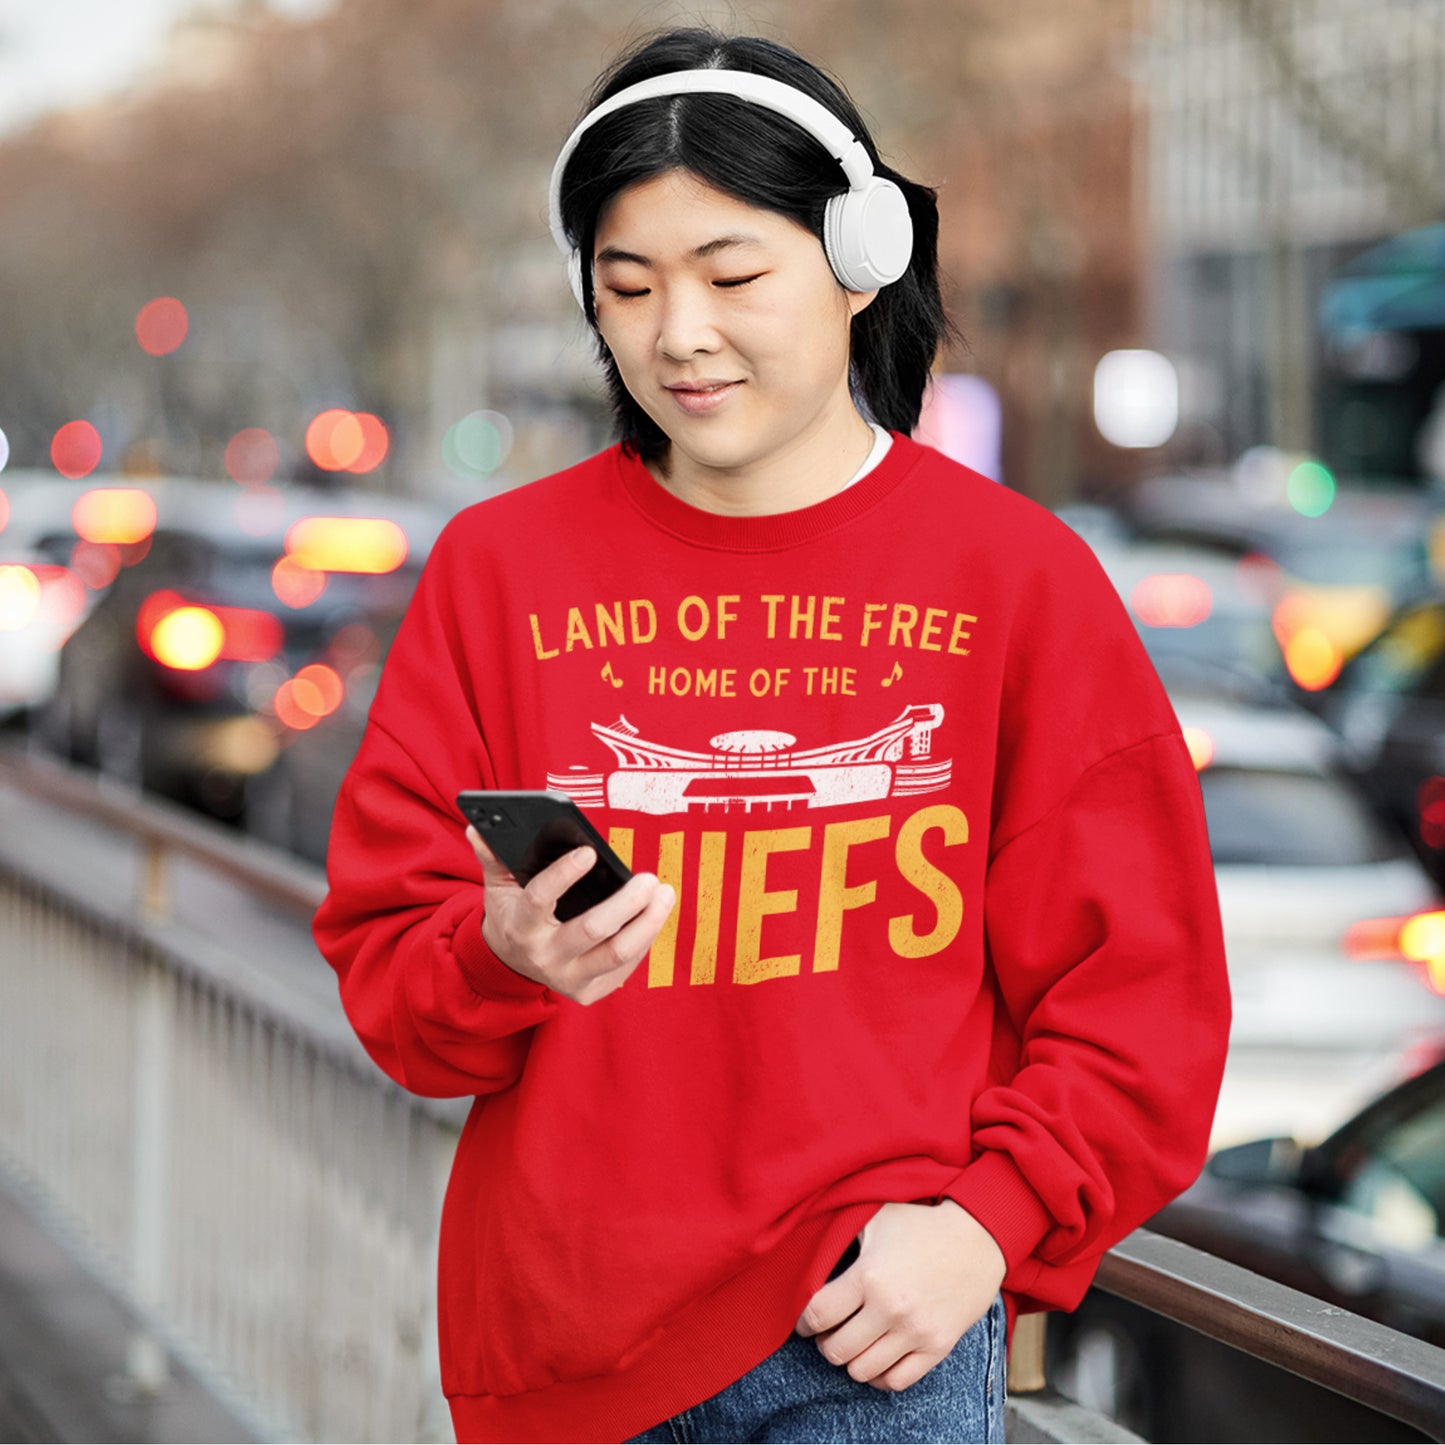 KC Swag Kansas City Chiefs Distressed White & Gold Home Of The Chiefs on a Red Crewneck Sweatshirt worn by a female model wwearing headphones on a busy downtown street